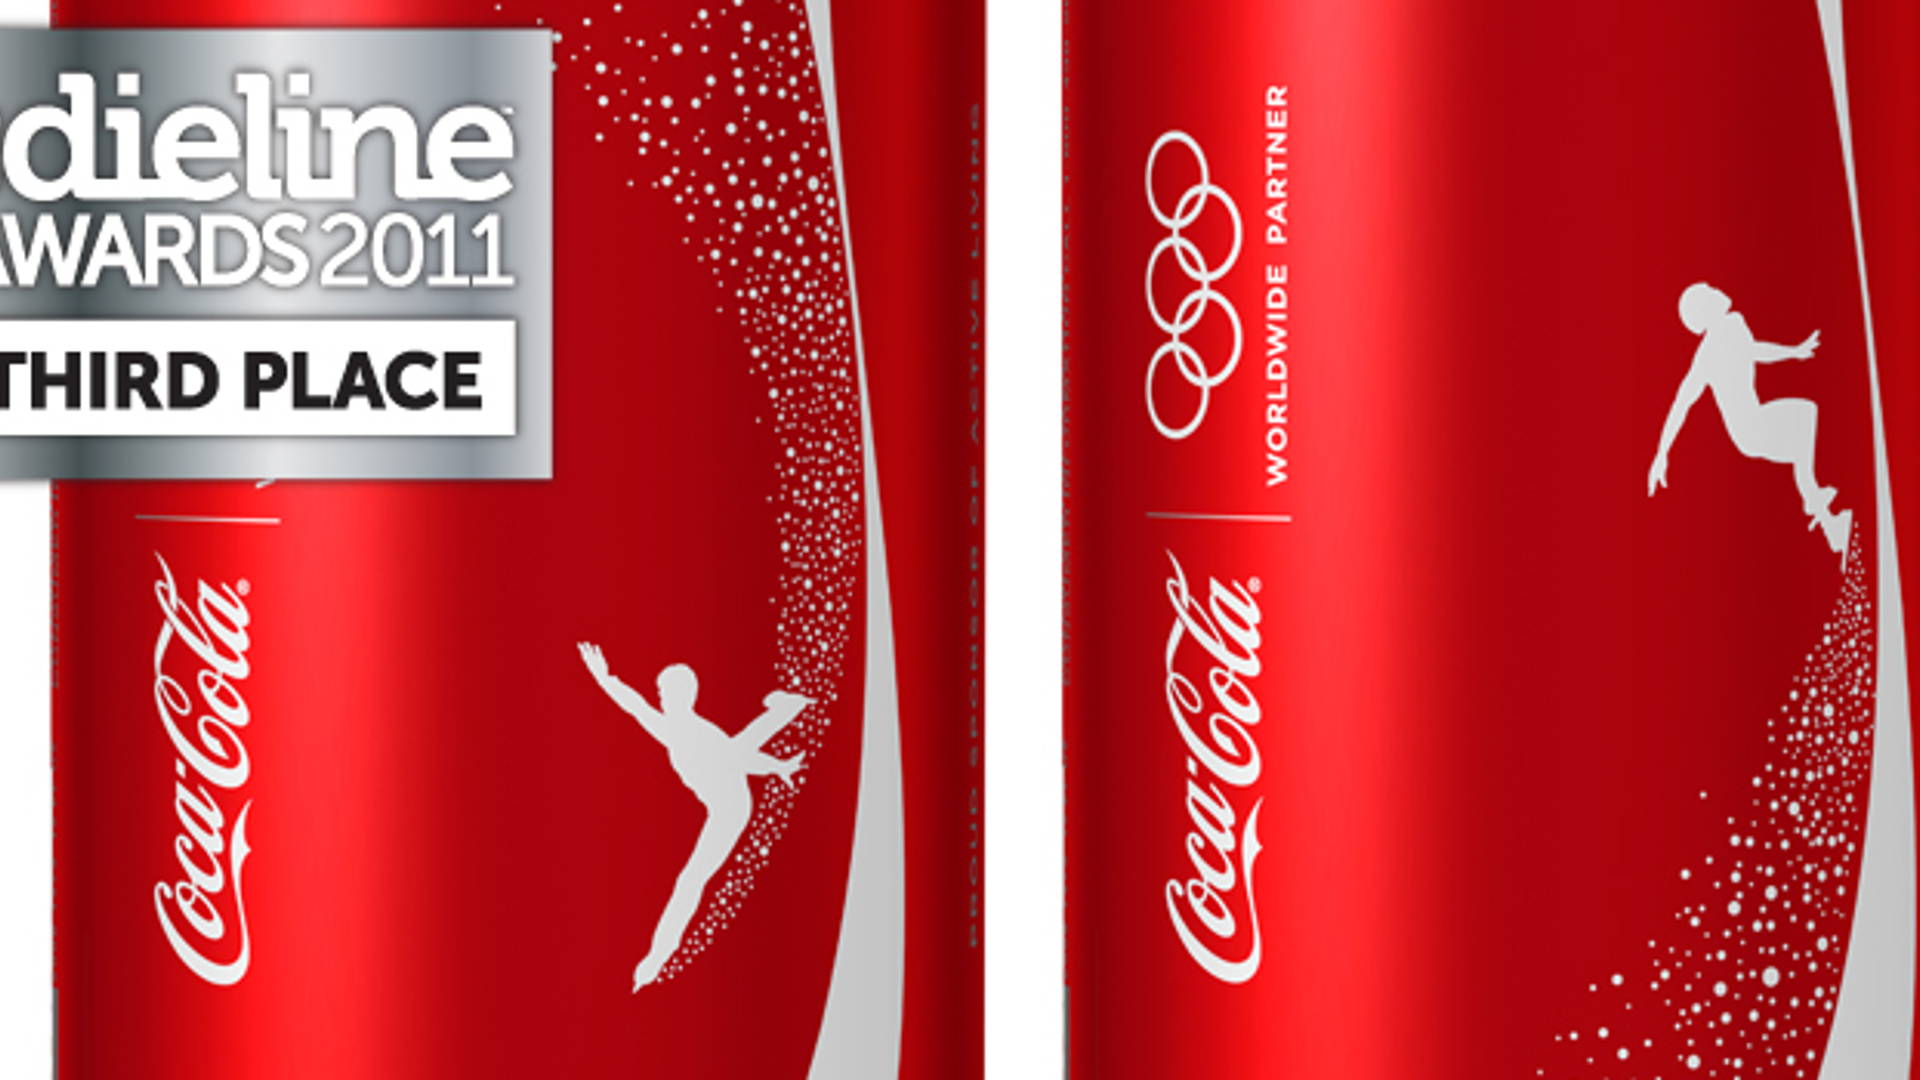 Featured image for The Dieline Awards 2011: Third Place - Coca-Cola 2010 Winter Olympics Packaging and Premium